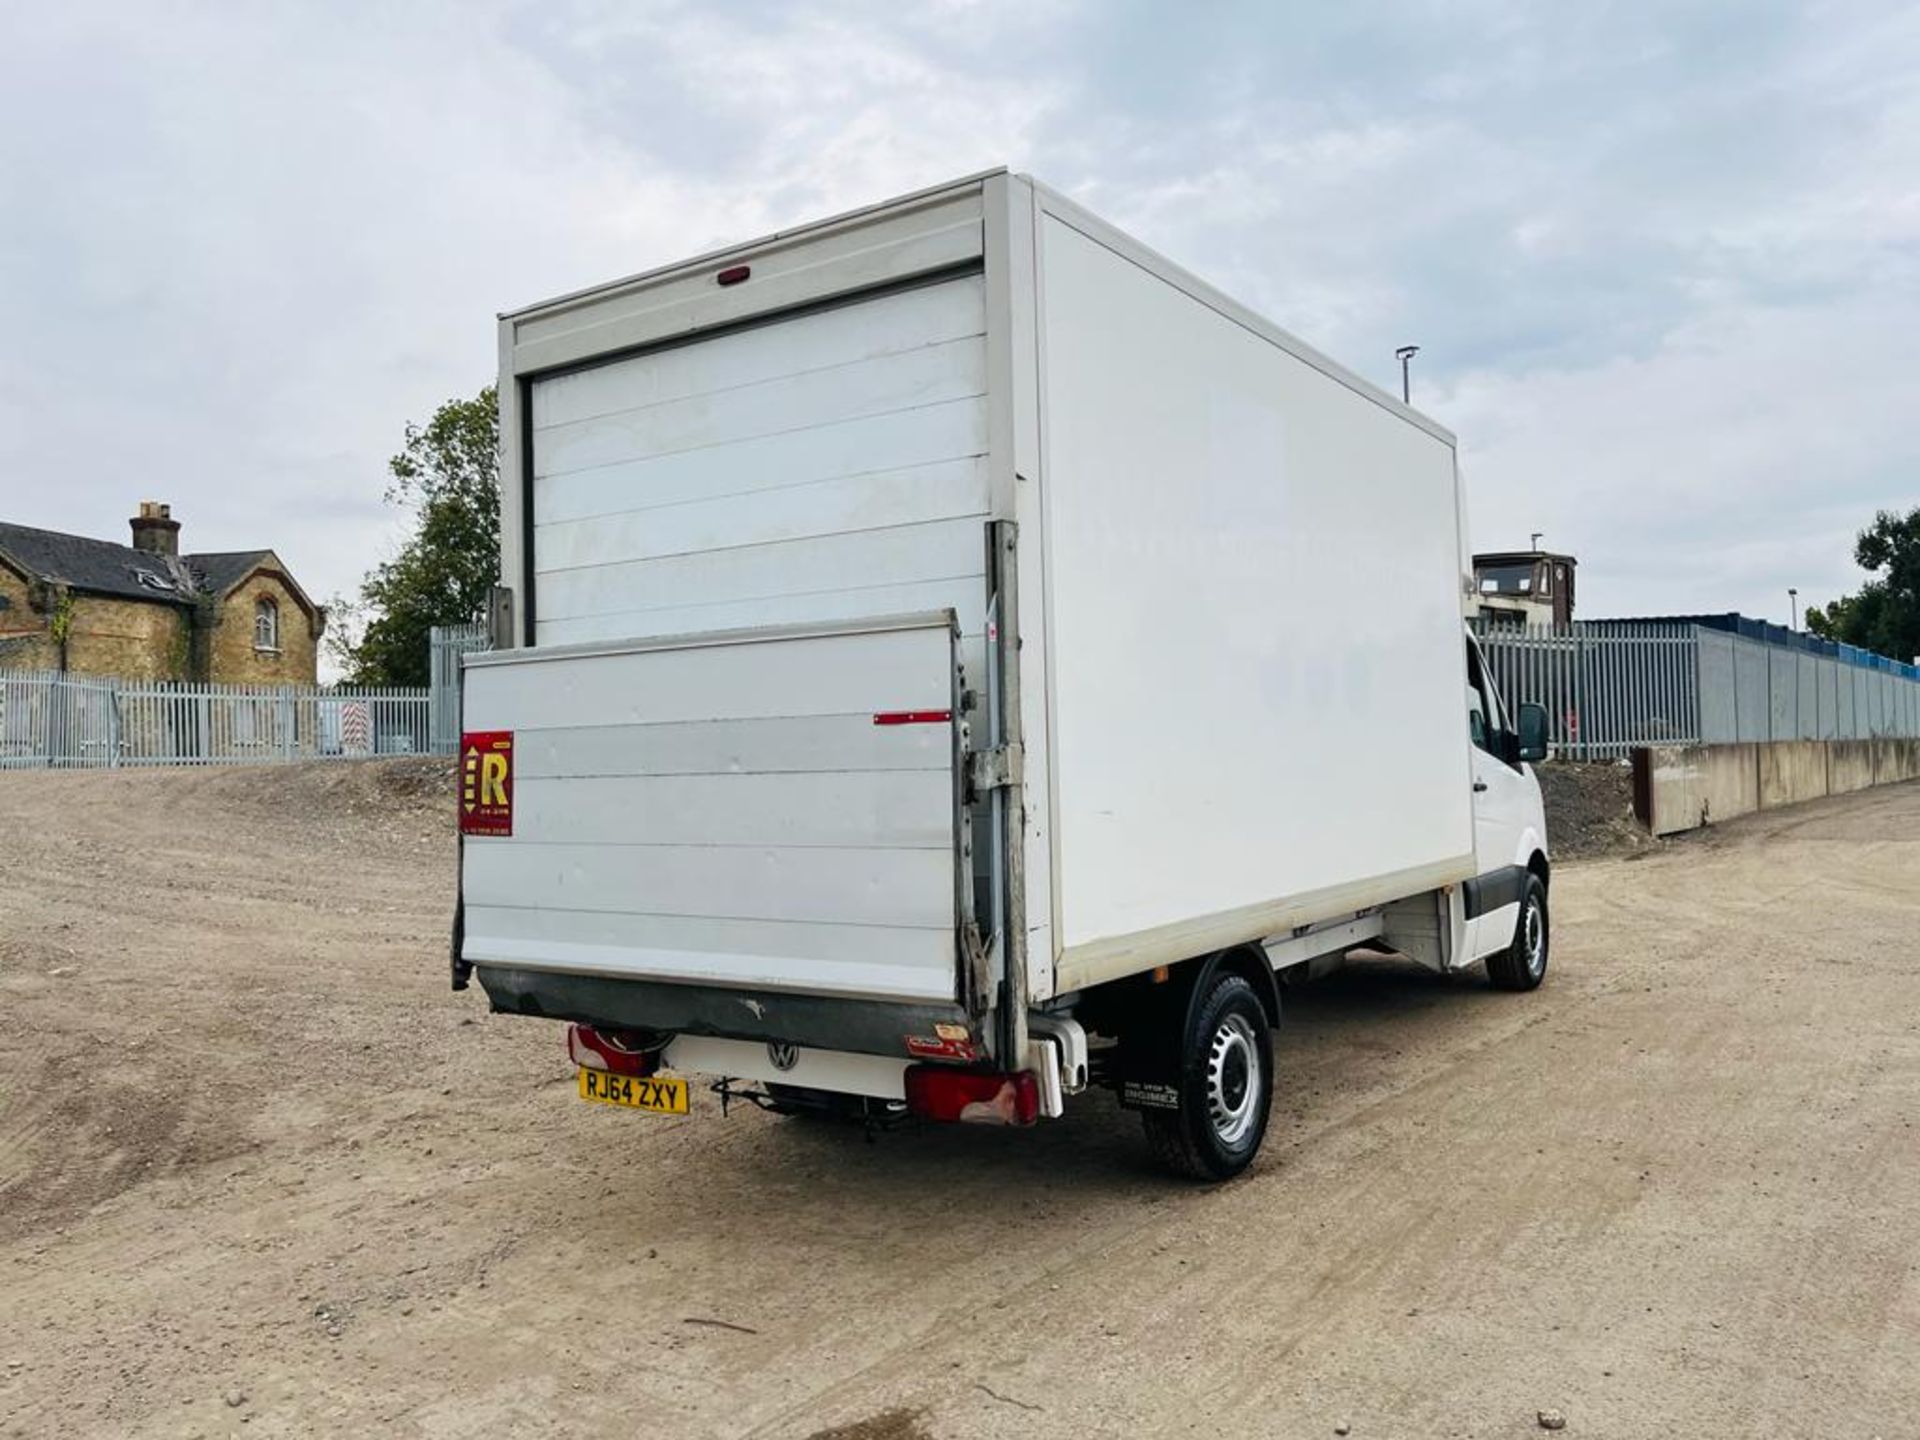 ** ON SALE ** Volkswagen Crafter 35 2.0 TDI 136 LWB 2015 (64 Reg) - Luton Body - Tail Lift - Image 11 of 26